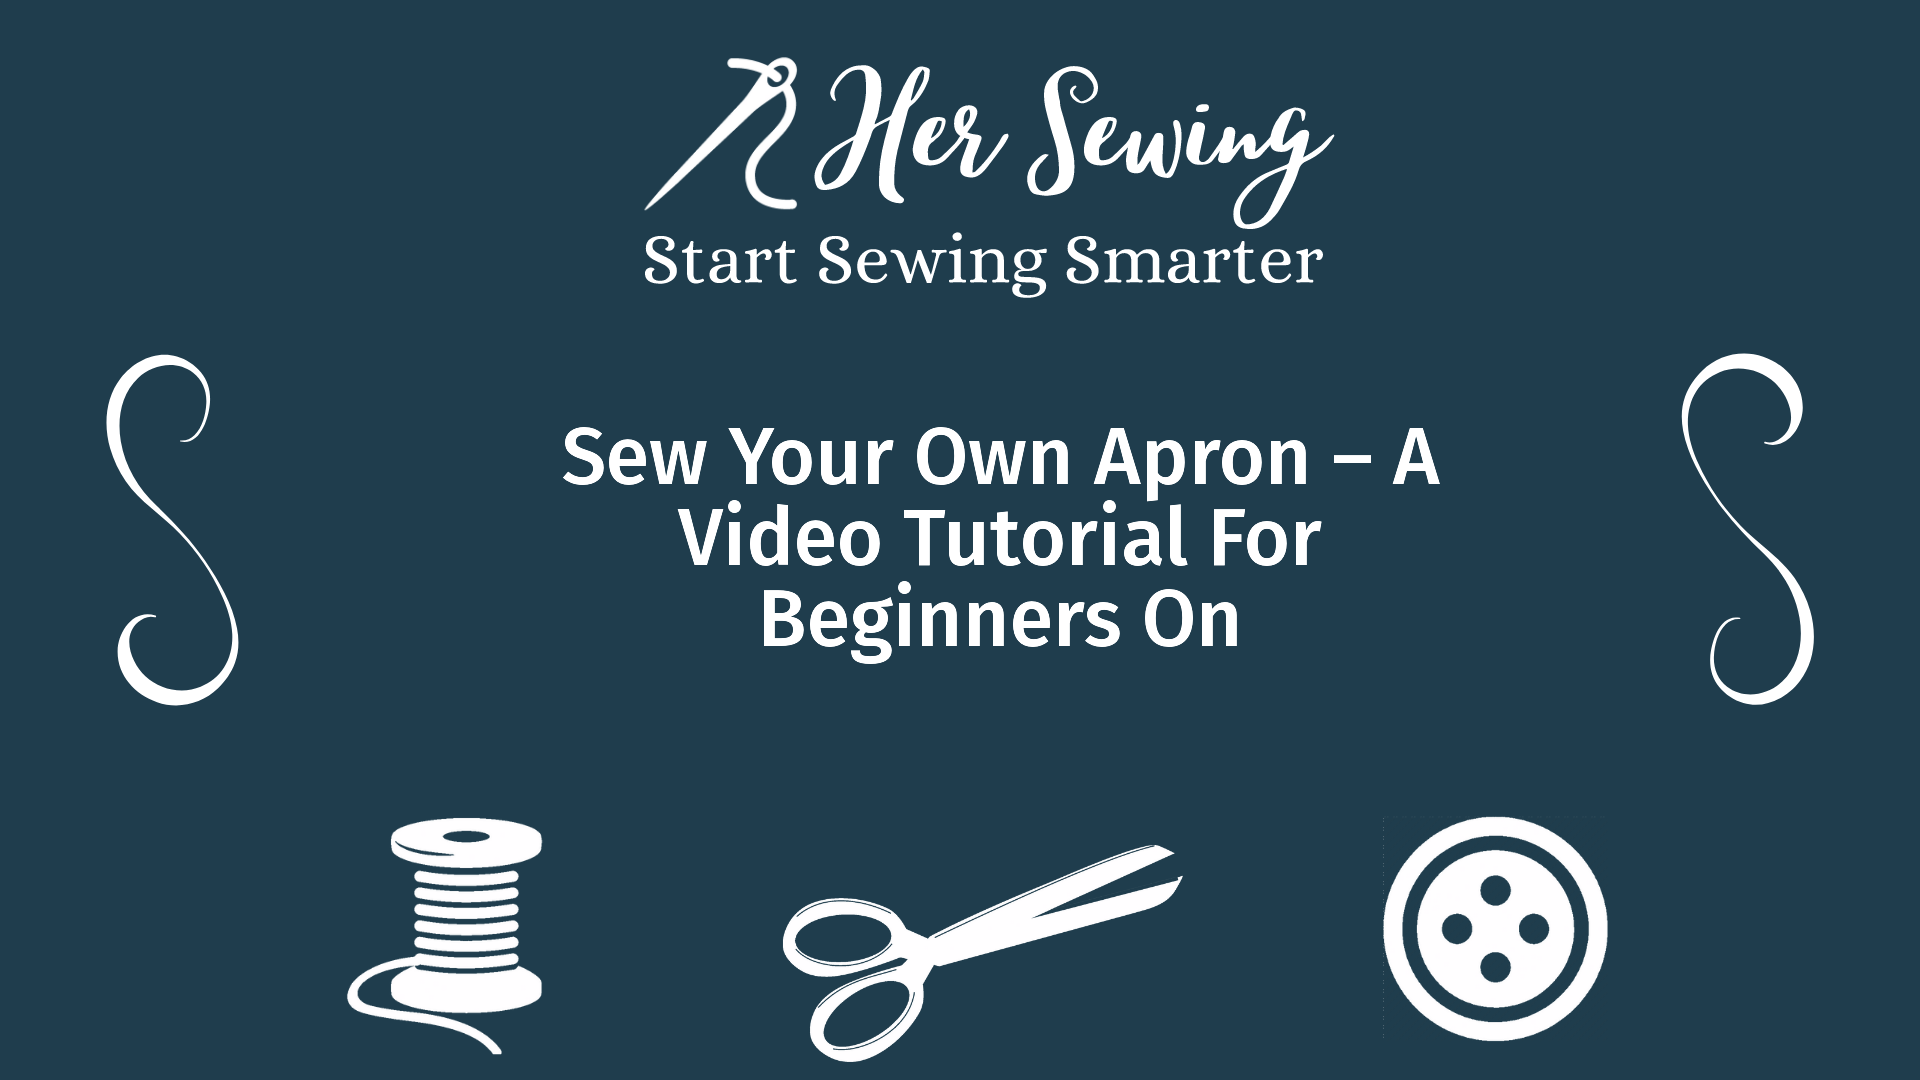 Sew Your Own Apron – A Video Tutorial For Beginners On